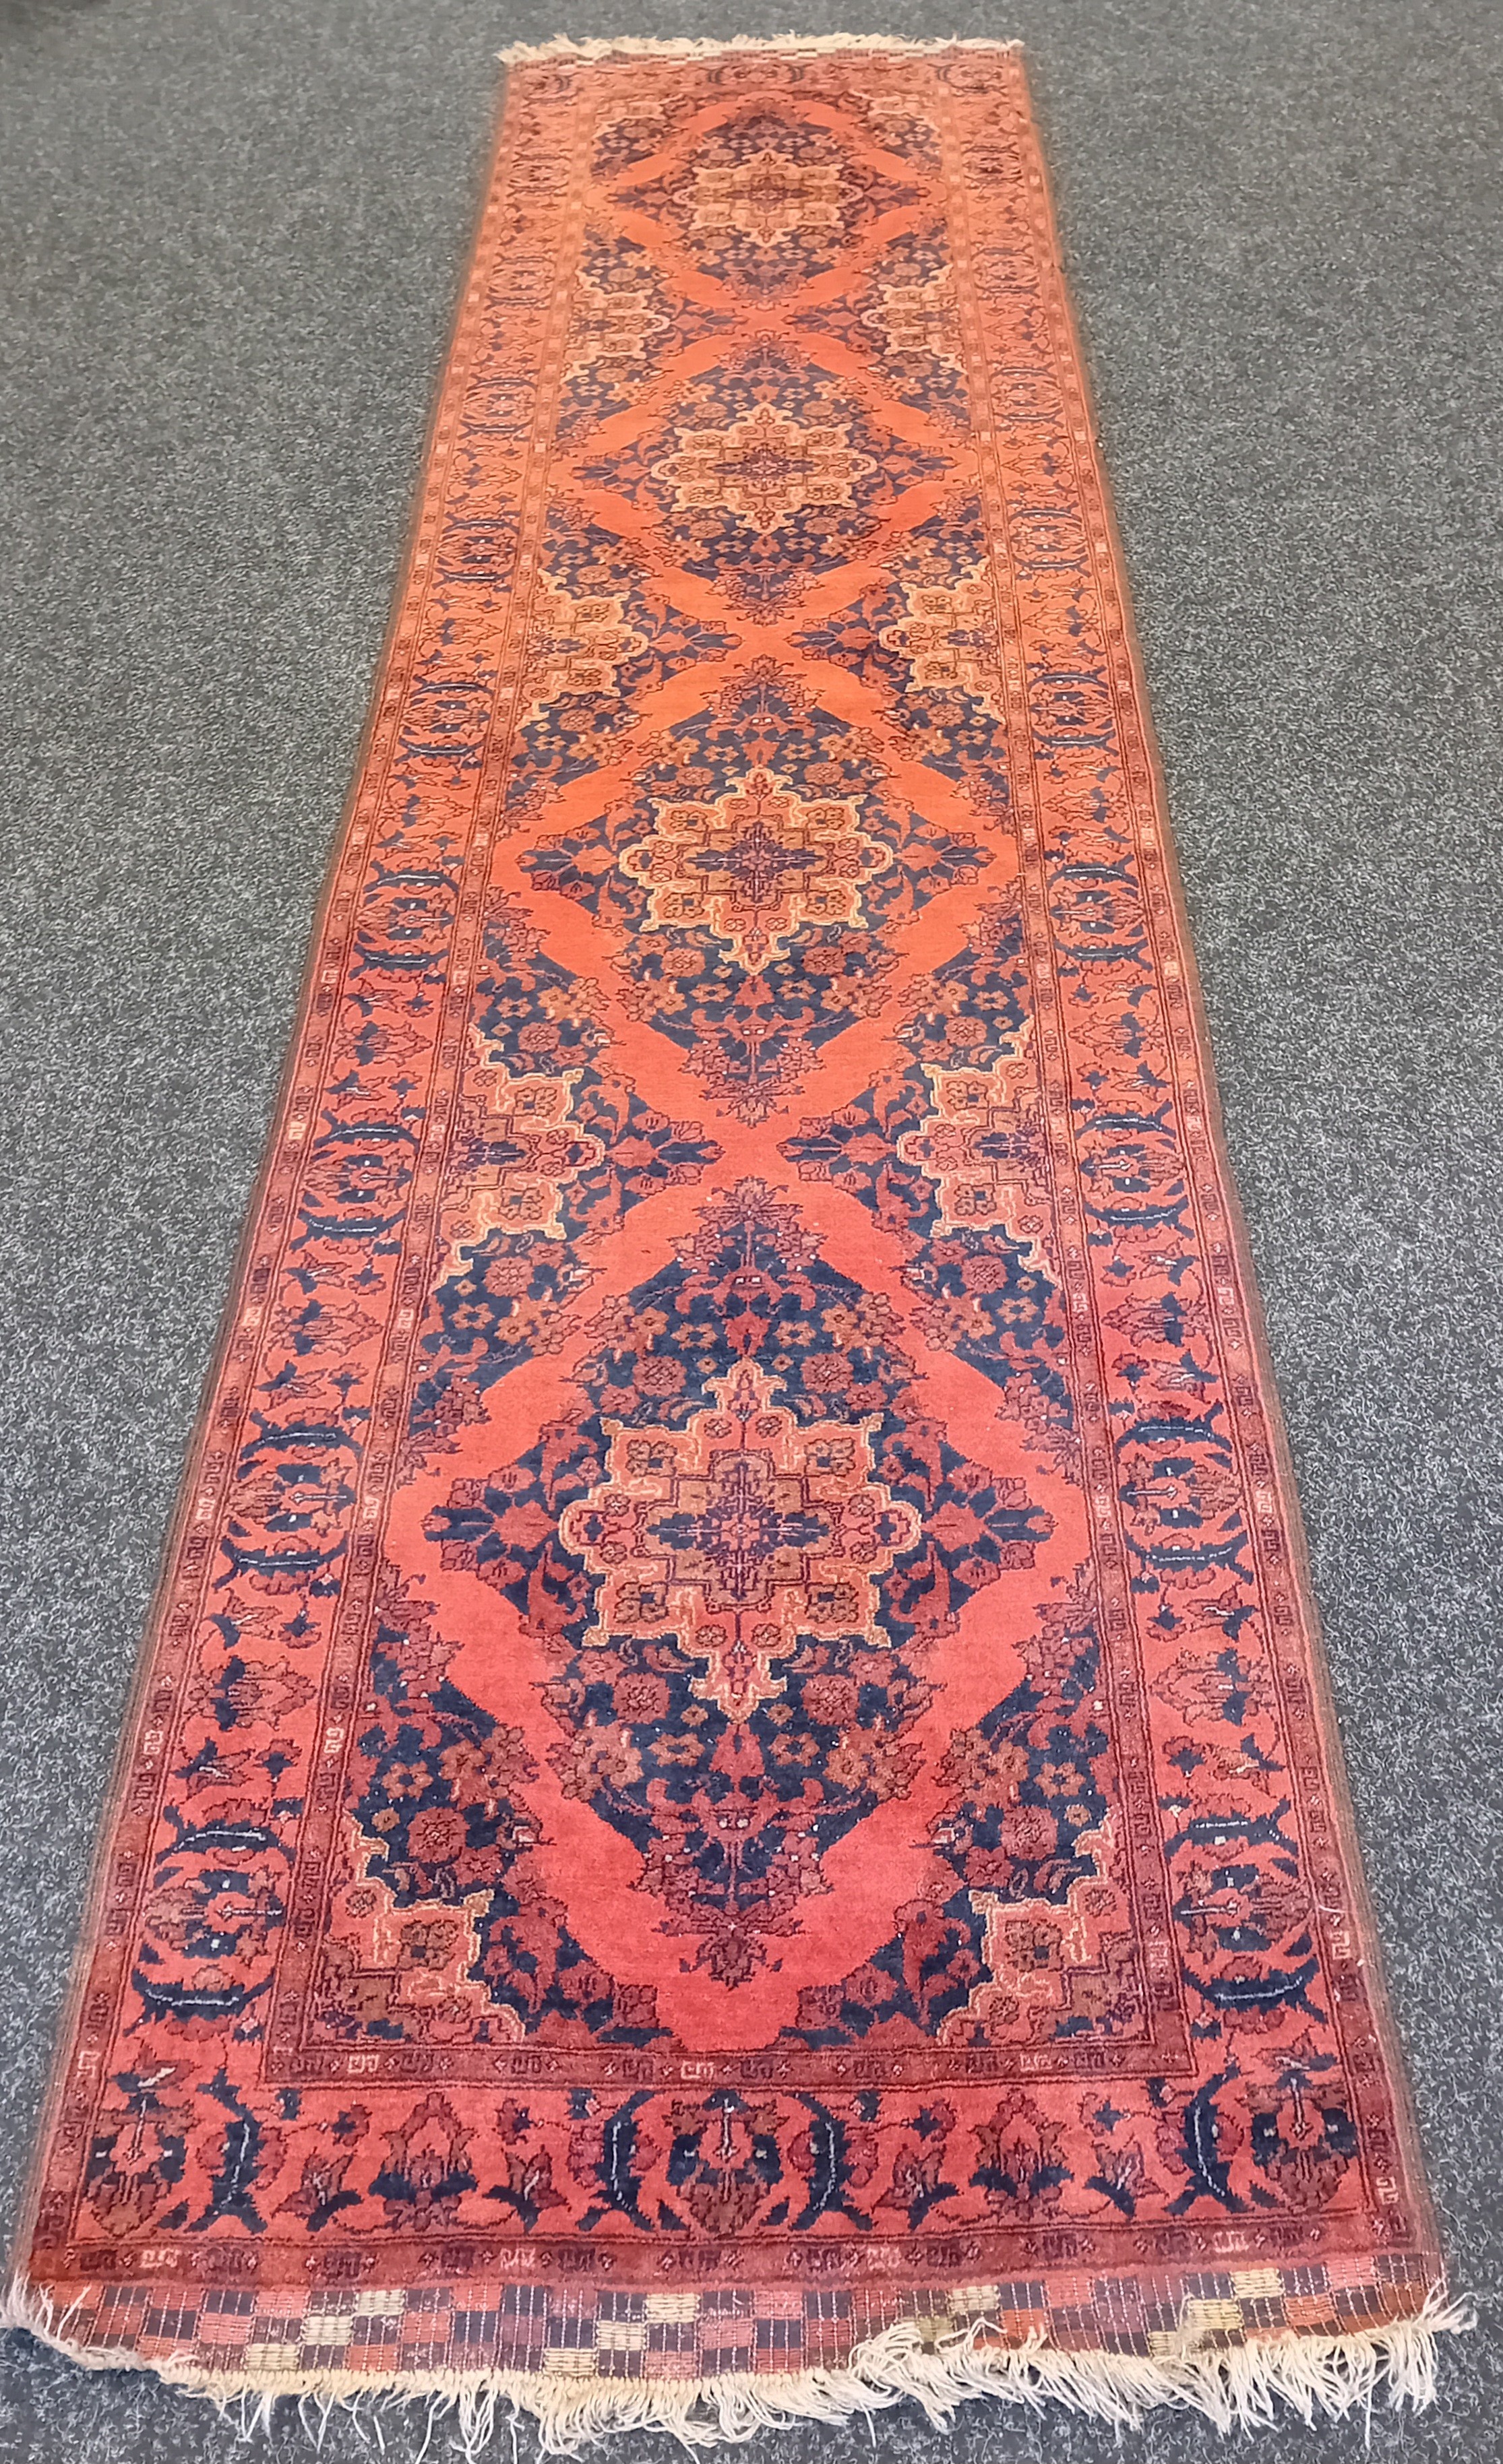 Antique red and blue hall runner [390x95cm]